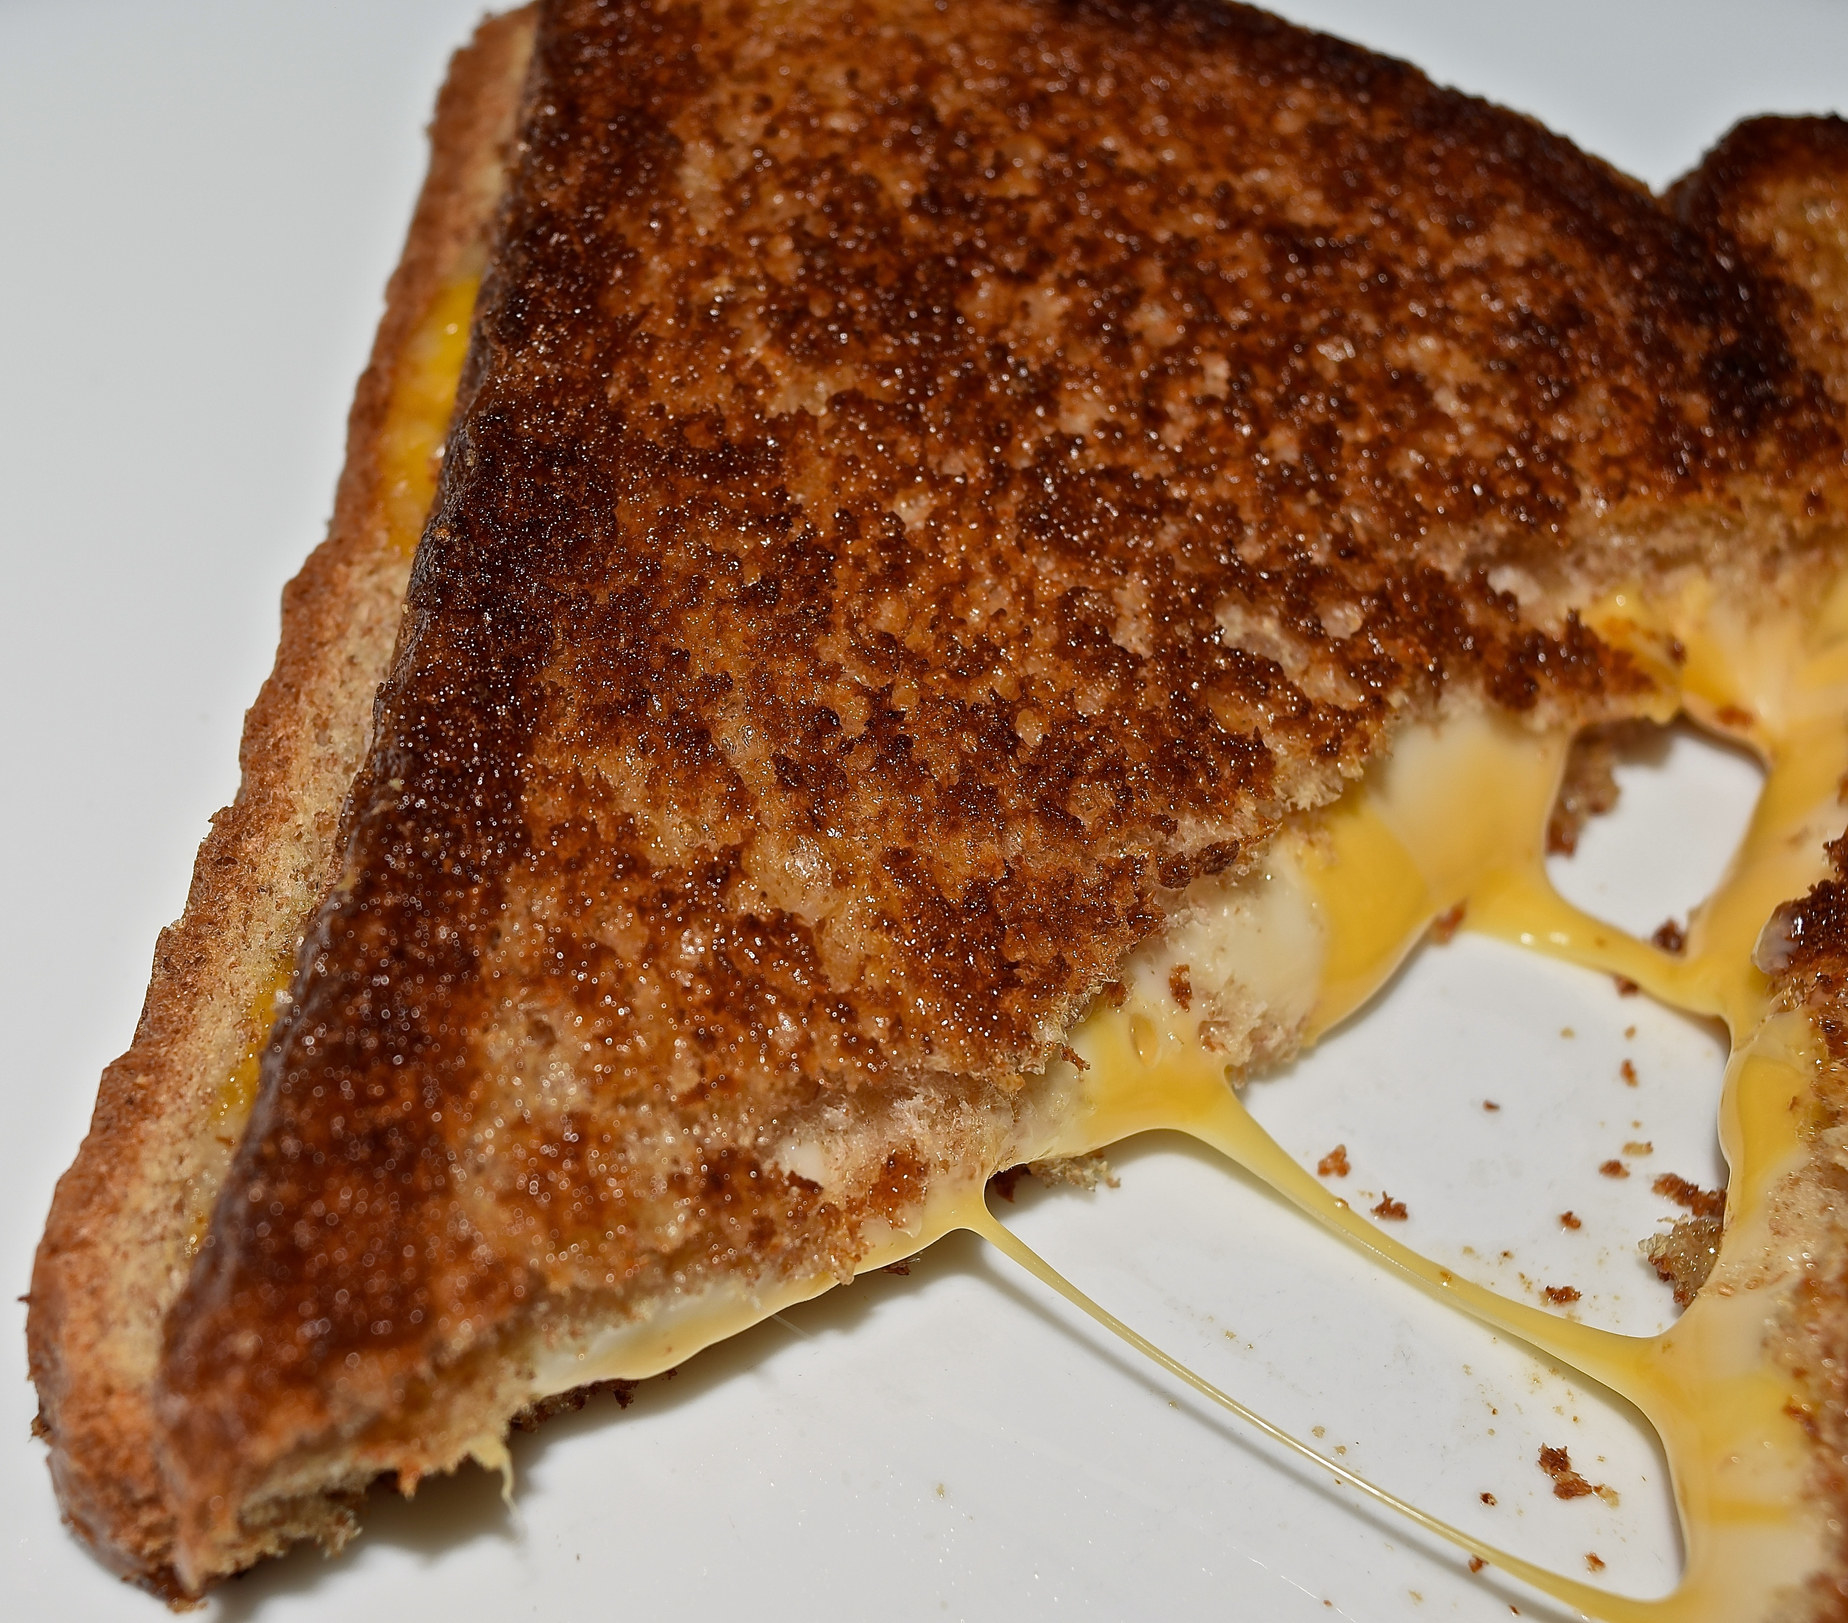 A close-up of a grilled cheese sandwich.